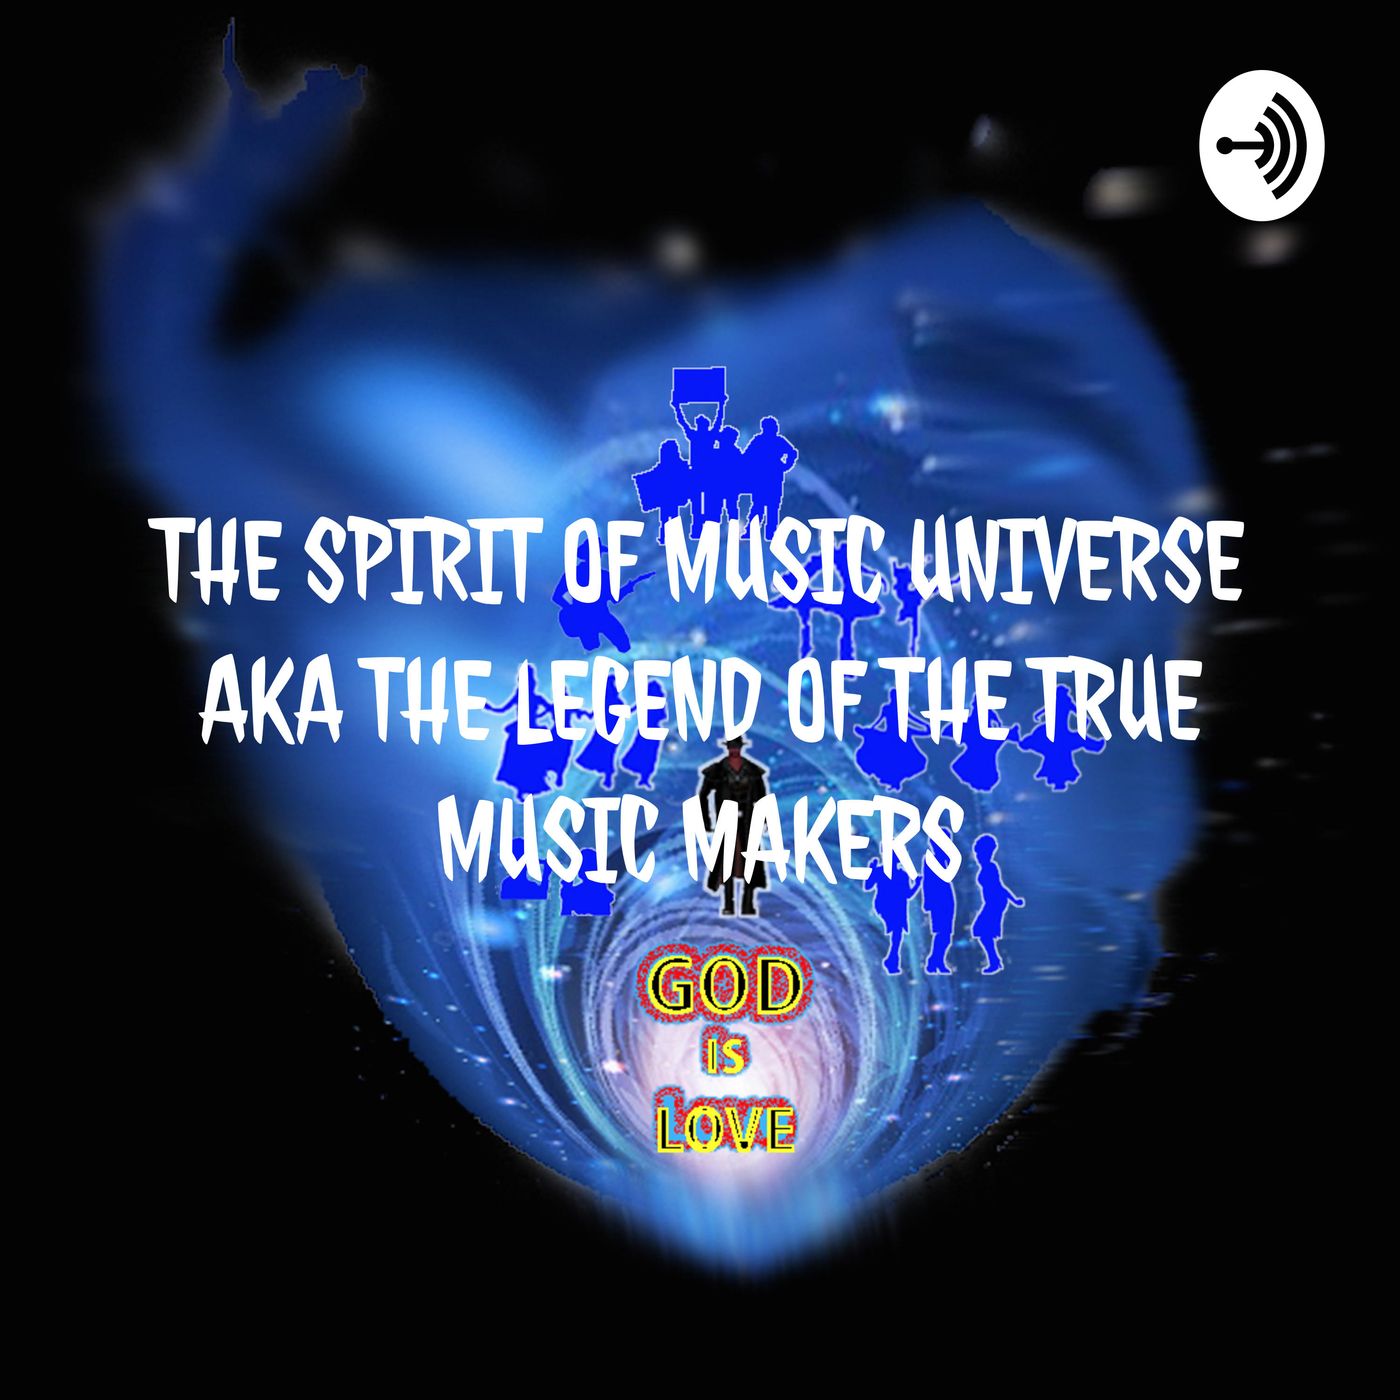 THE SPIRIT OF MUSIC UNIVERSE AKA THE LEGEND OF THE TRUE MUSIC MAKERS